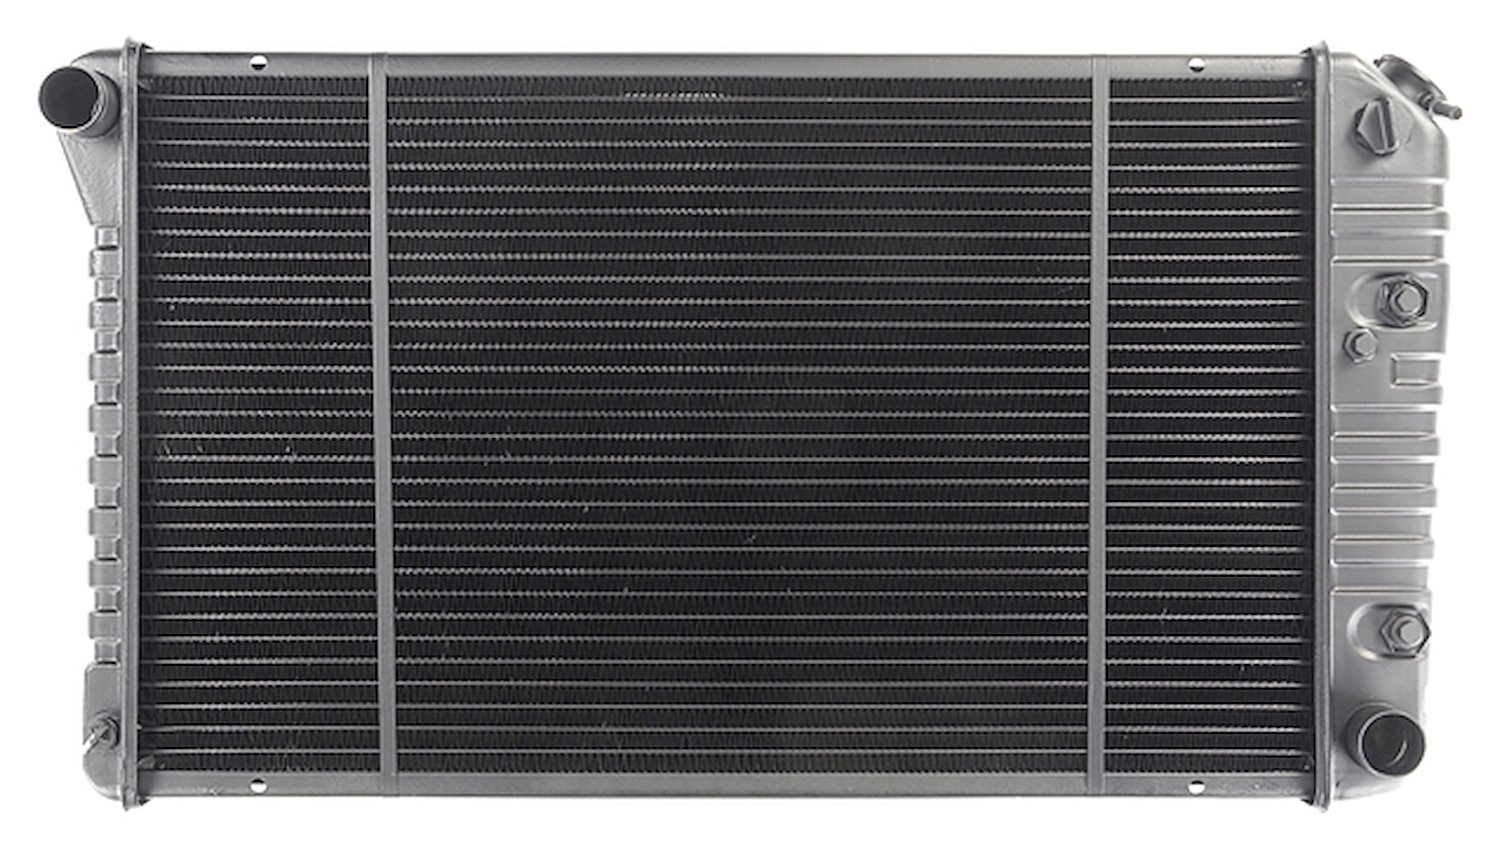 Replacement Radiator Fits Select 1971-1977 Chevrolet, Oldsmobile & Pontiac Models [4-row]